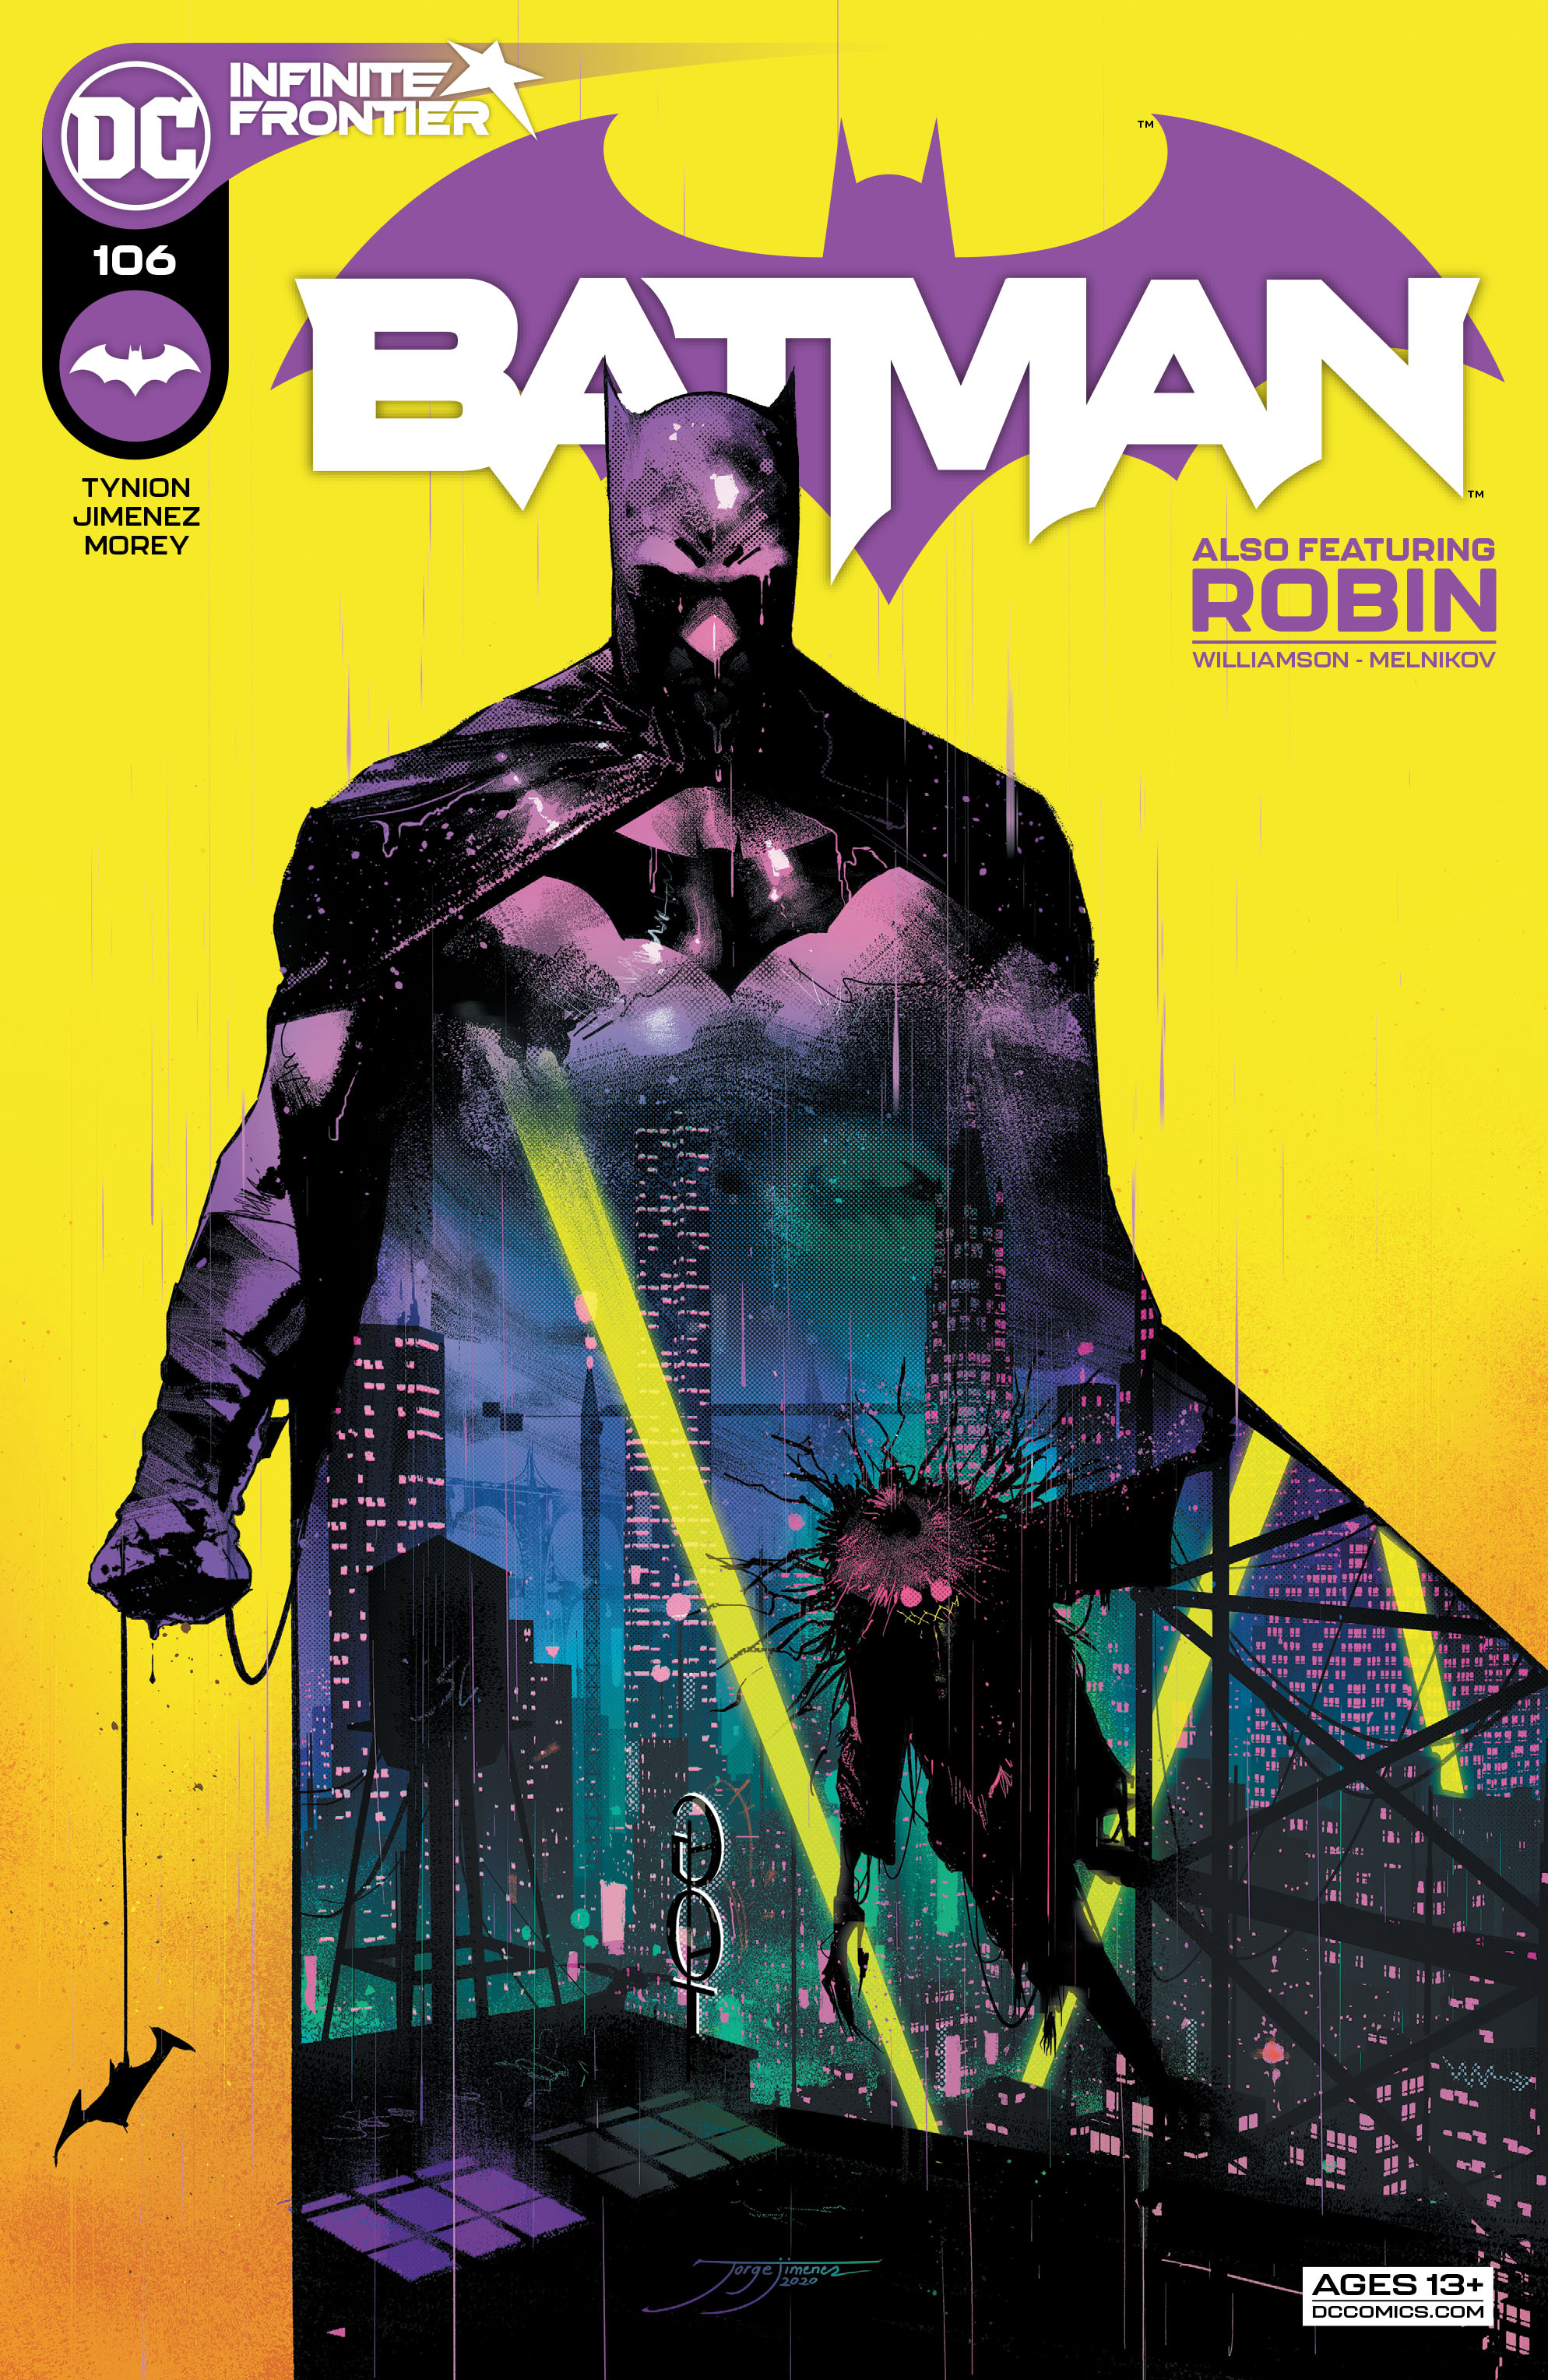 Batman 2016 Issue 106 | Read Batman 2016 Issue 106 comic online in high  quality. Read Full Comic online for free - Read comics online in high  quality .| READ COMIC ONLINE